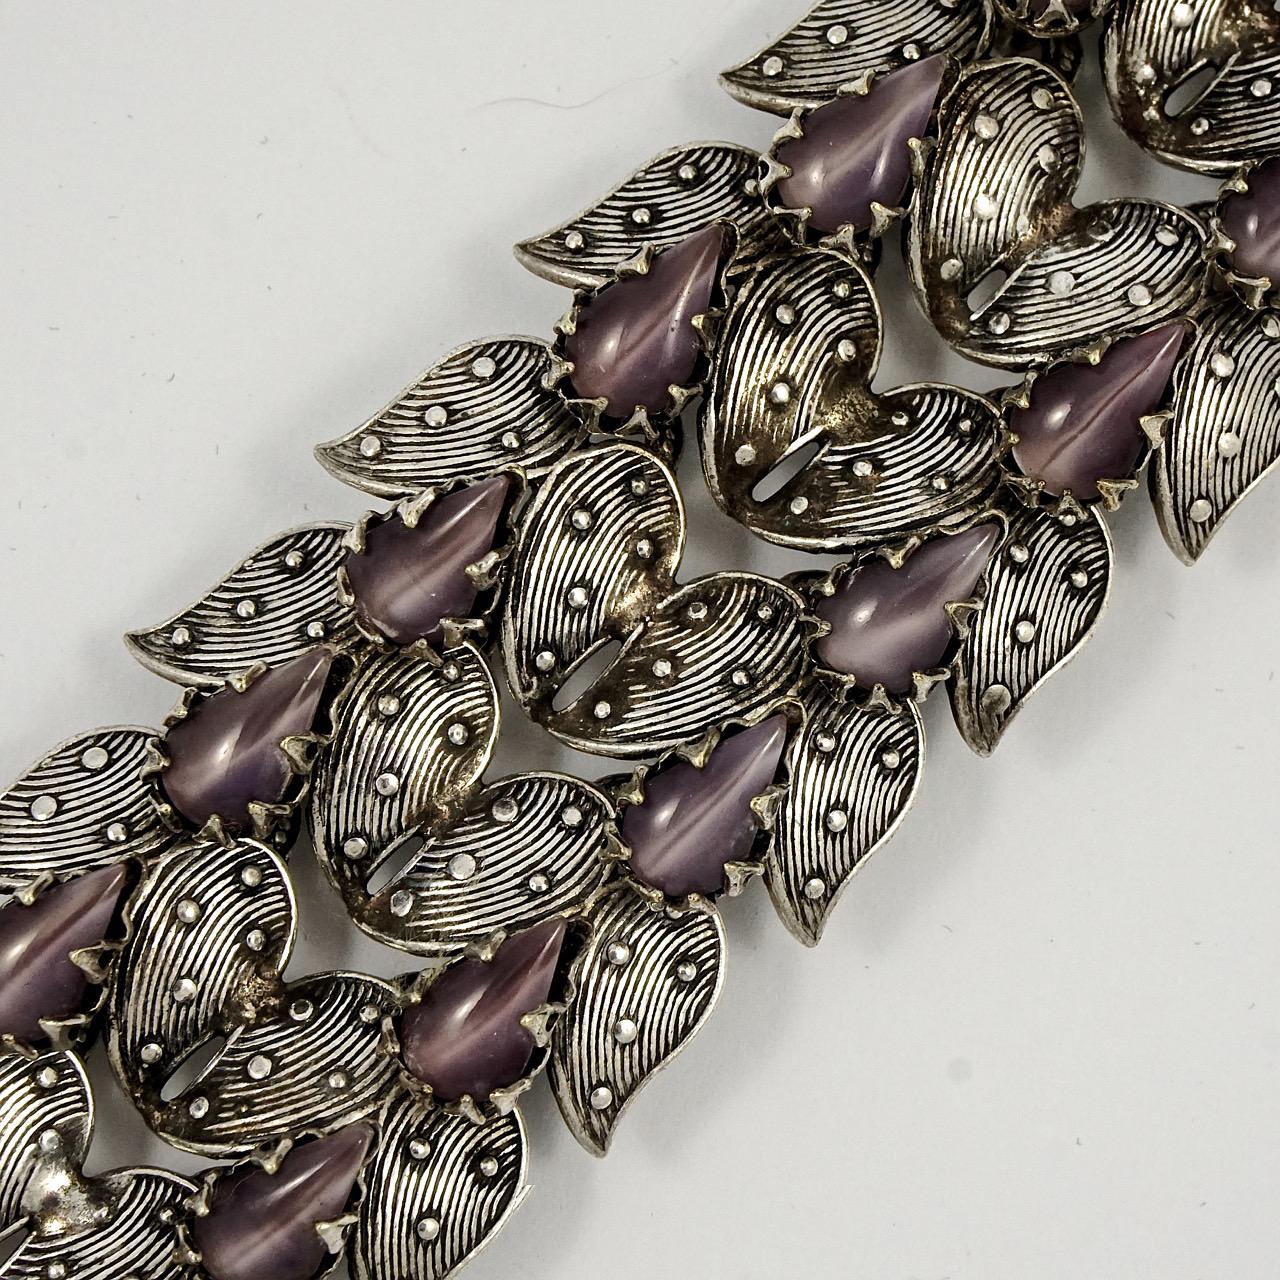 Fabulous Giuliano Fratti signed GM silver plated ridged and dot design leaf link bracelet, with mauve glass tear drop stones. Measuring length 18cm / 7 inches by width 3.3cm / 1.3 inches. The bracelet is in very good condition, we have given it a